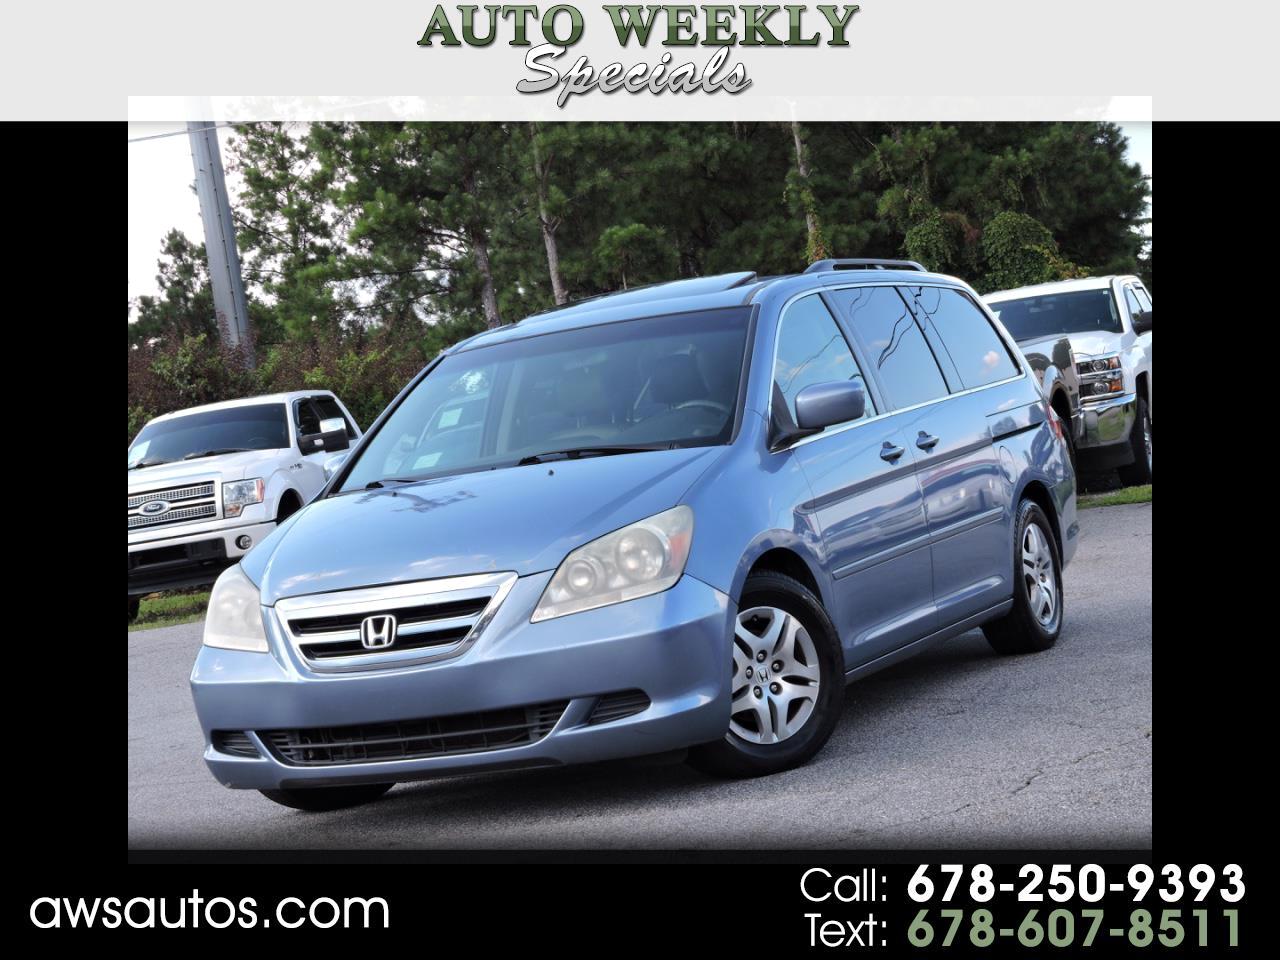 Used 2007 Honda Odyssey 5dr EX-L w/RES for Sale in Marietta GA 30062 Auto Weekly Specials